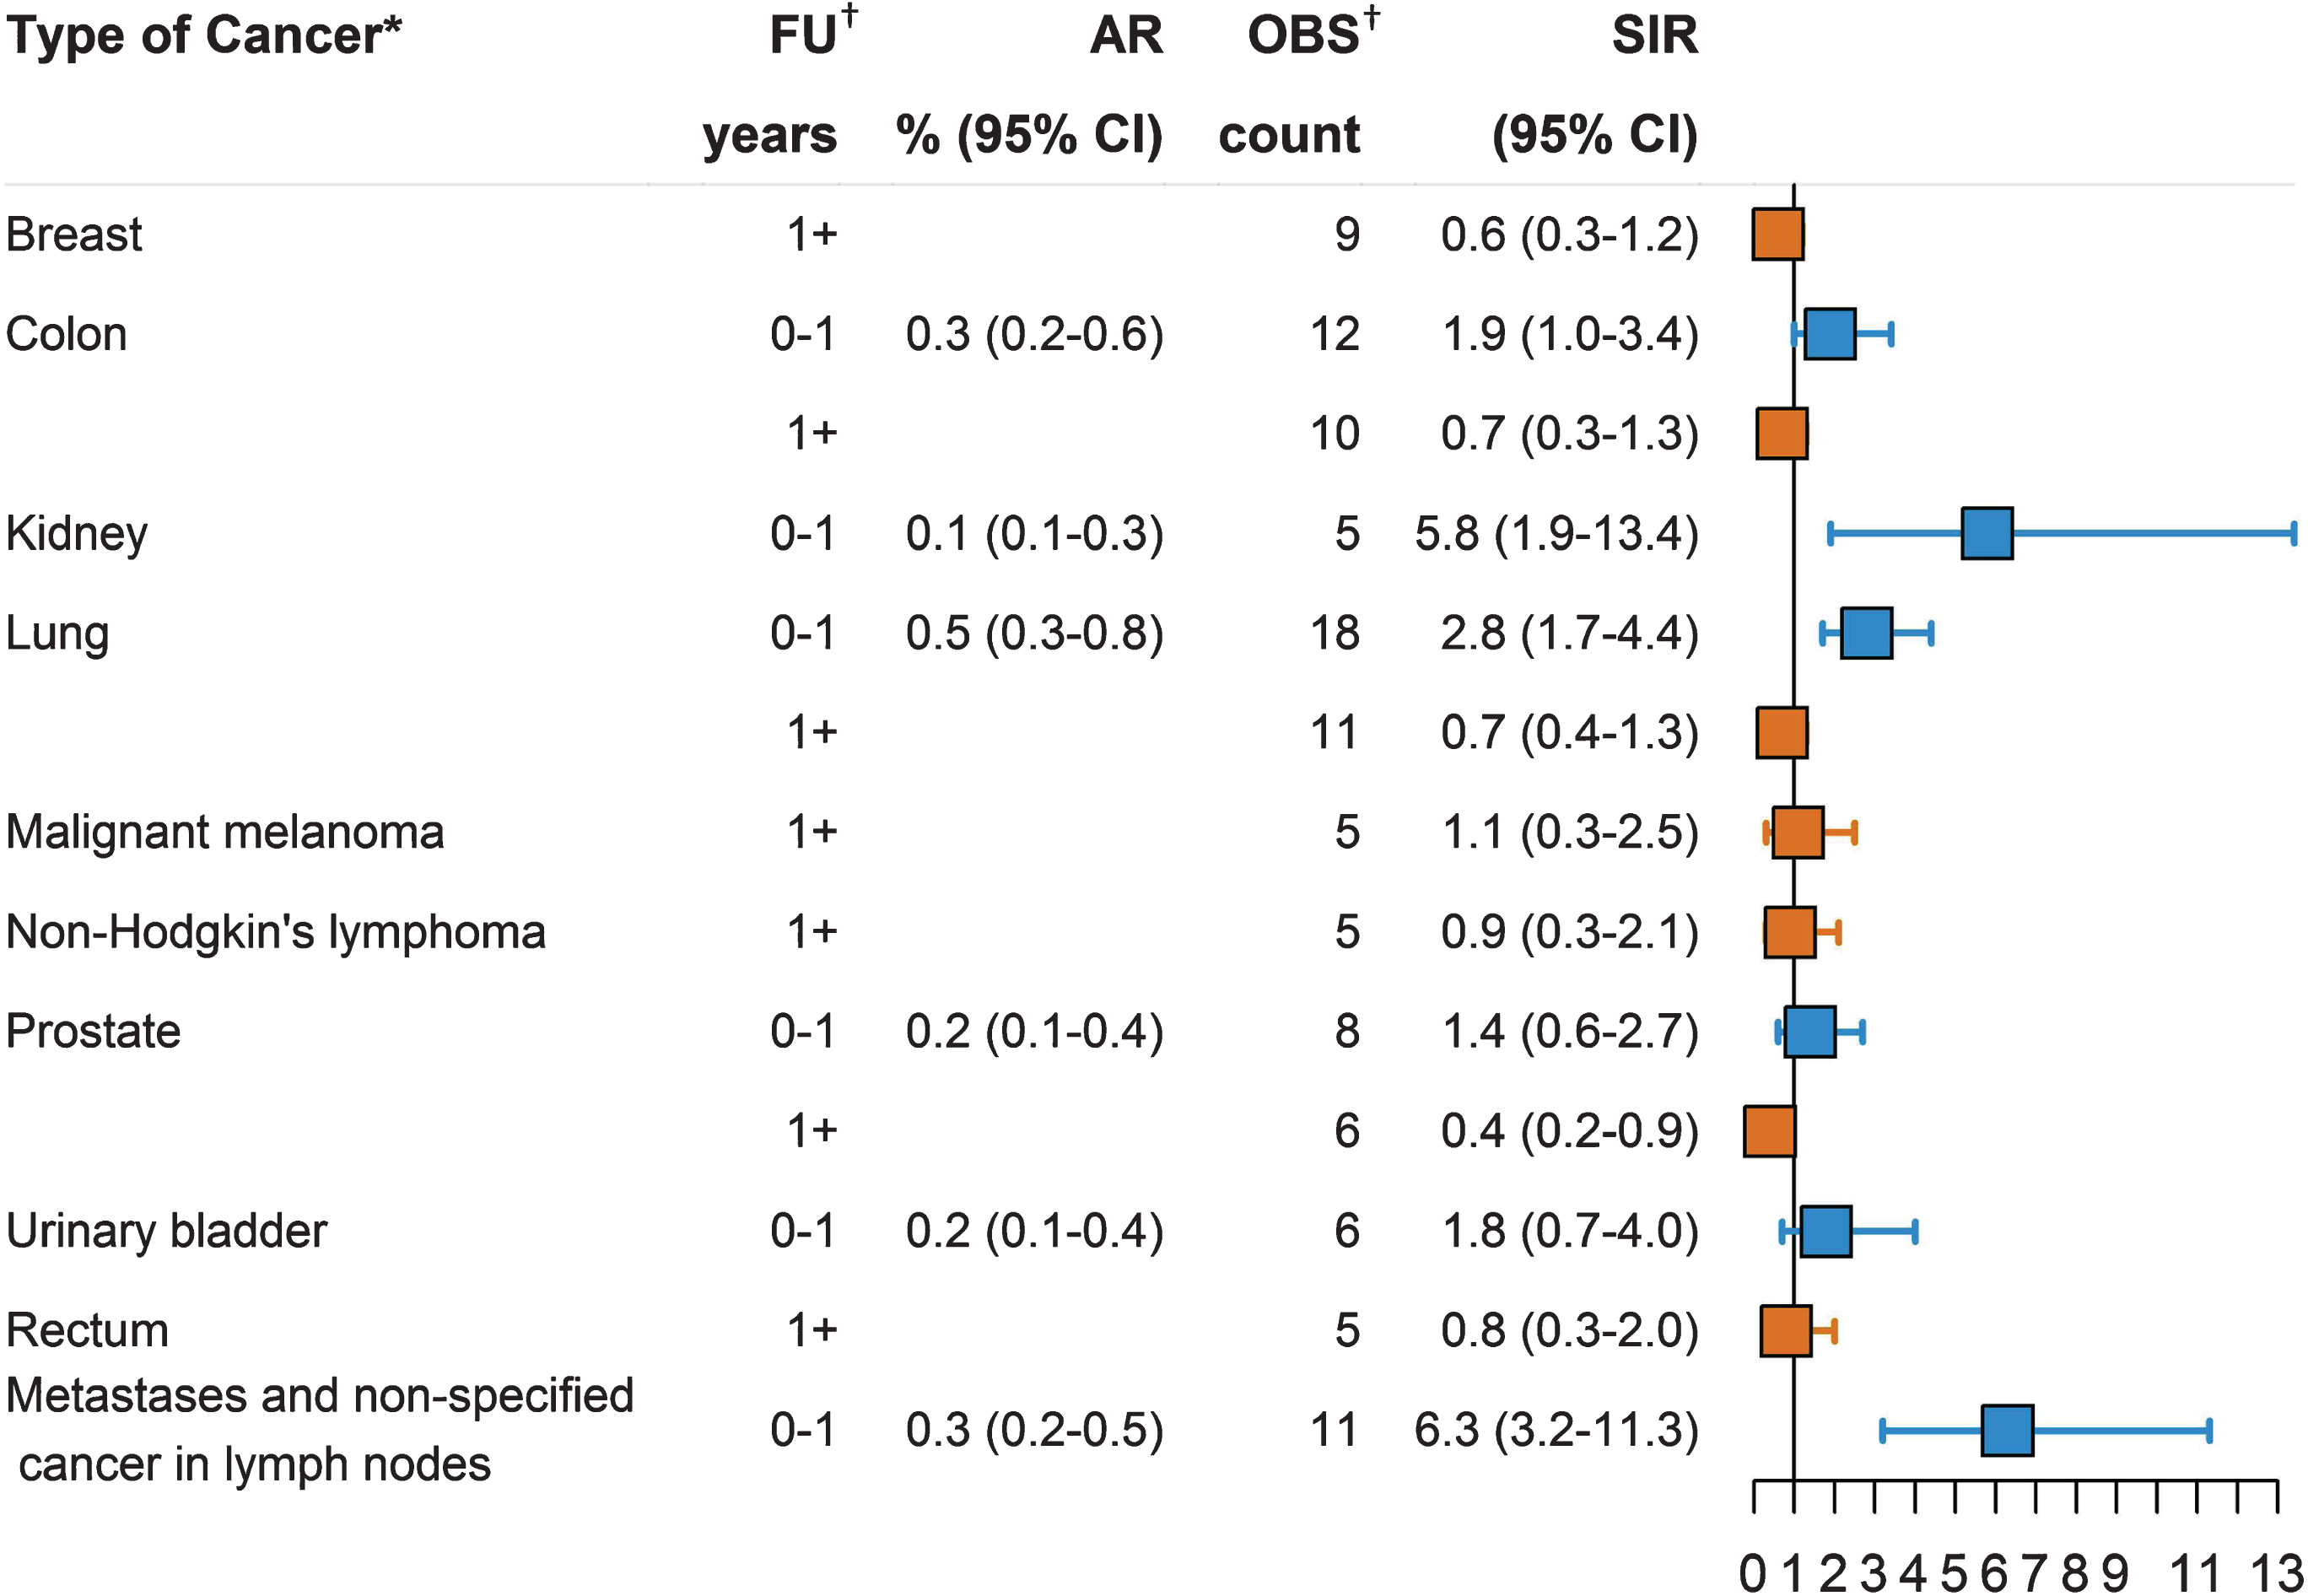 Risk of cancer following venous thromboembolism (VTE) among people with dementia according to cancer type. First year absolute risk (AR). First and subsequent years standardized incidence ratios (SIRs). *Only sites with 5 or more recorded cancers are presented. †FU, Follow-up; OBS, observations.